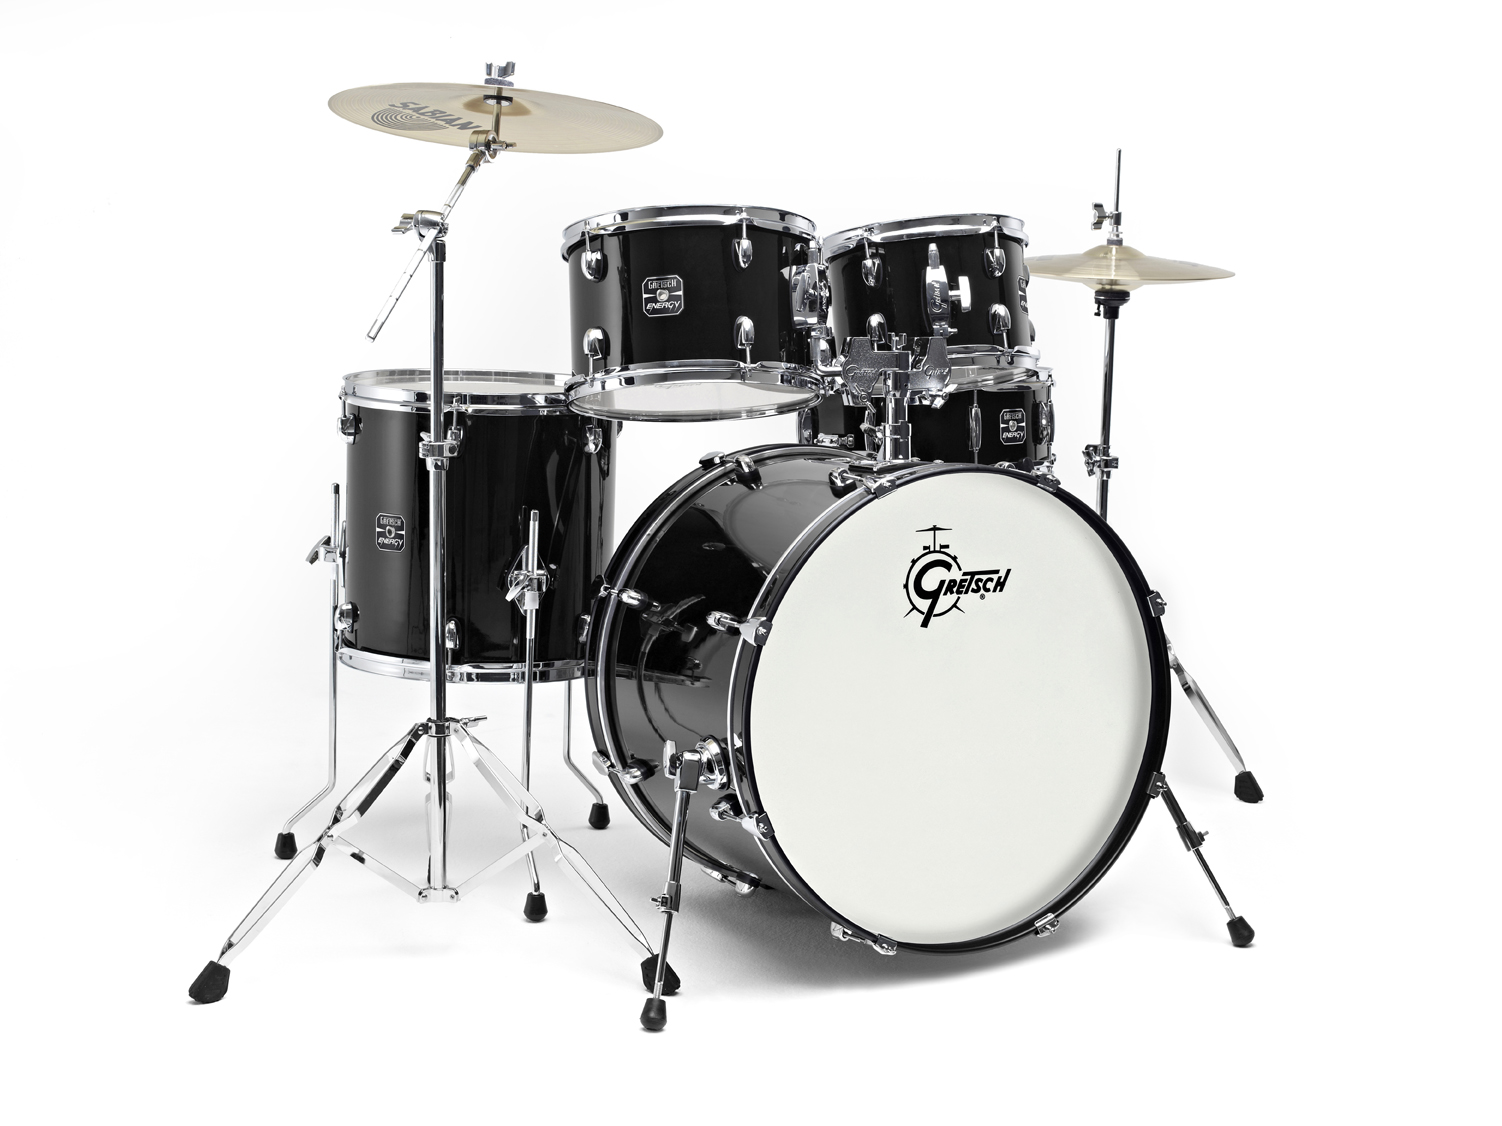 GRETSCH DRUMS GE1-E605TK-BK - NEW ENERGY FUSION 20